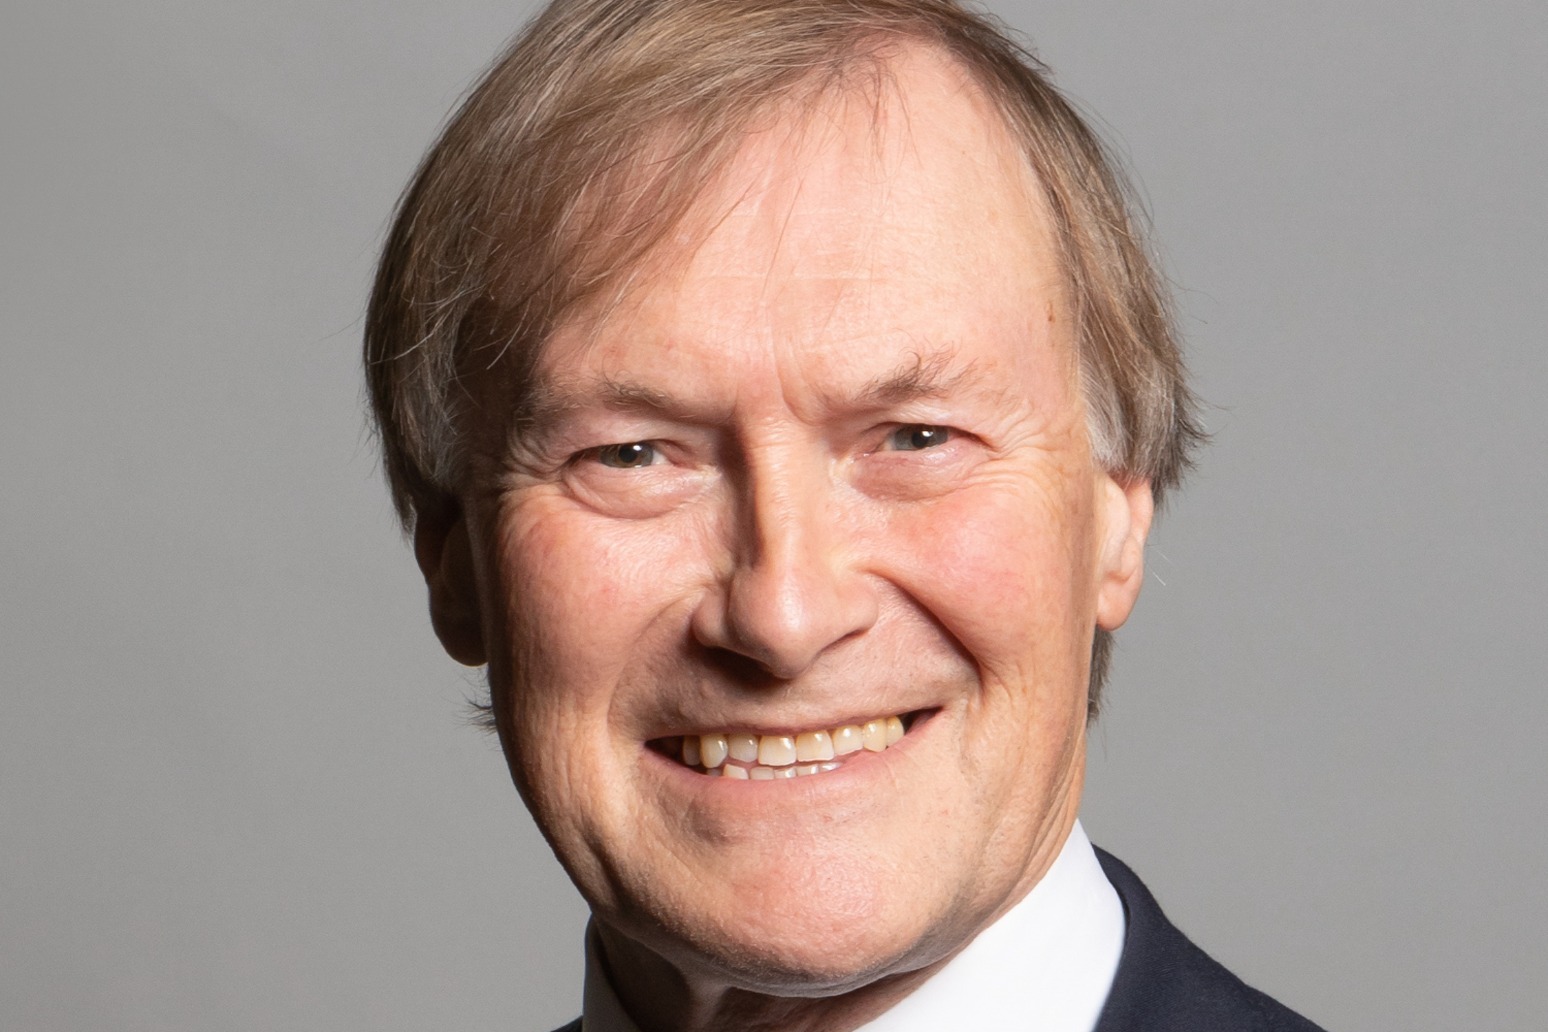 Man accused of murdering Sir David Amess MP to appear at Old Bailey 